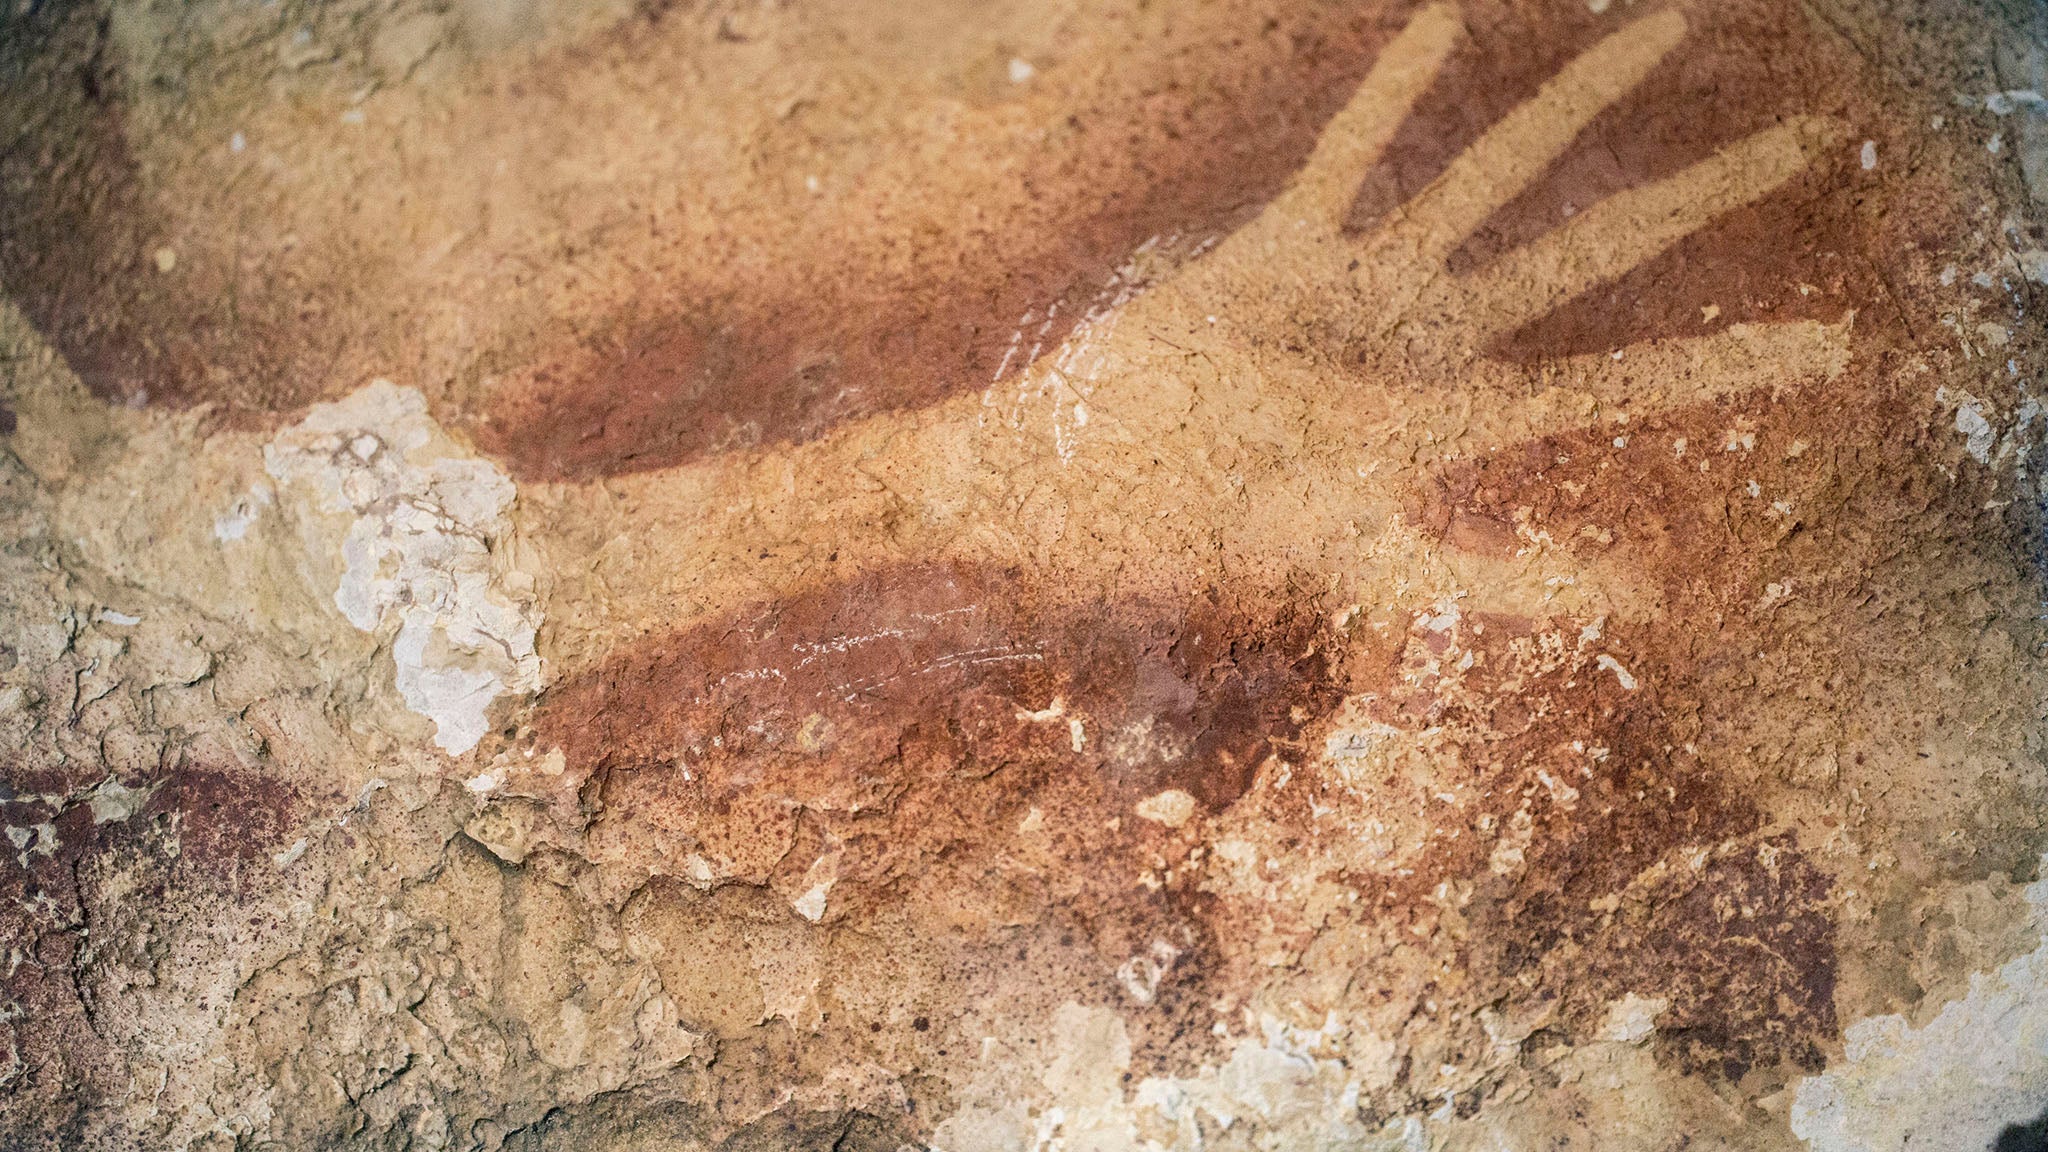 A hand stencil found in a cave in Indonesia, raising new questions about early mankind and the development of art in prehistoric times.